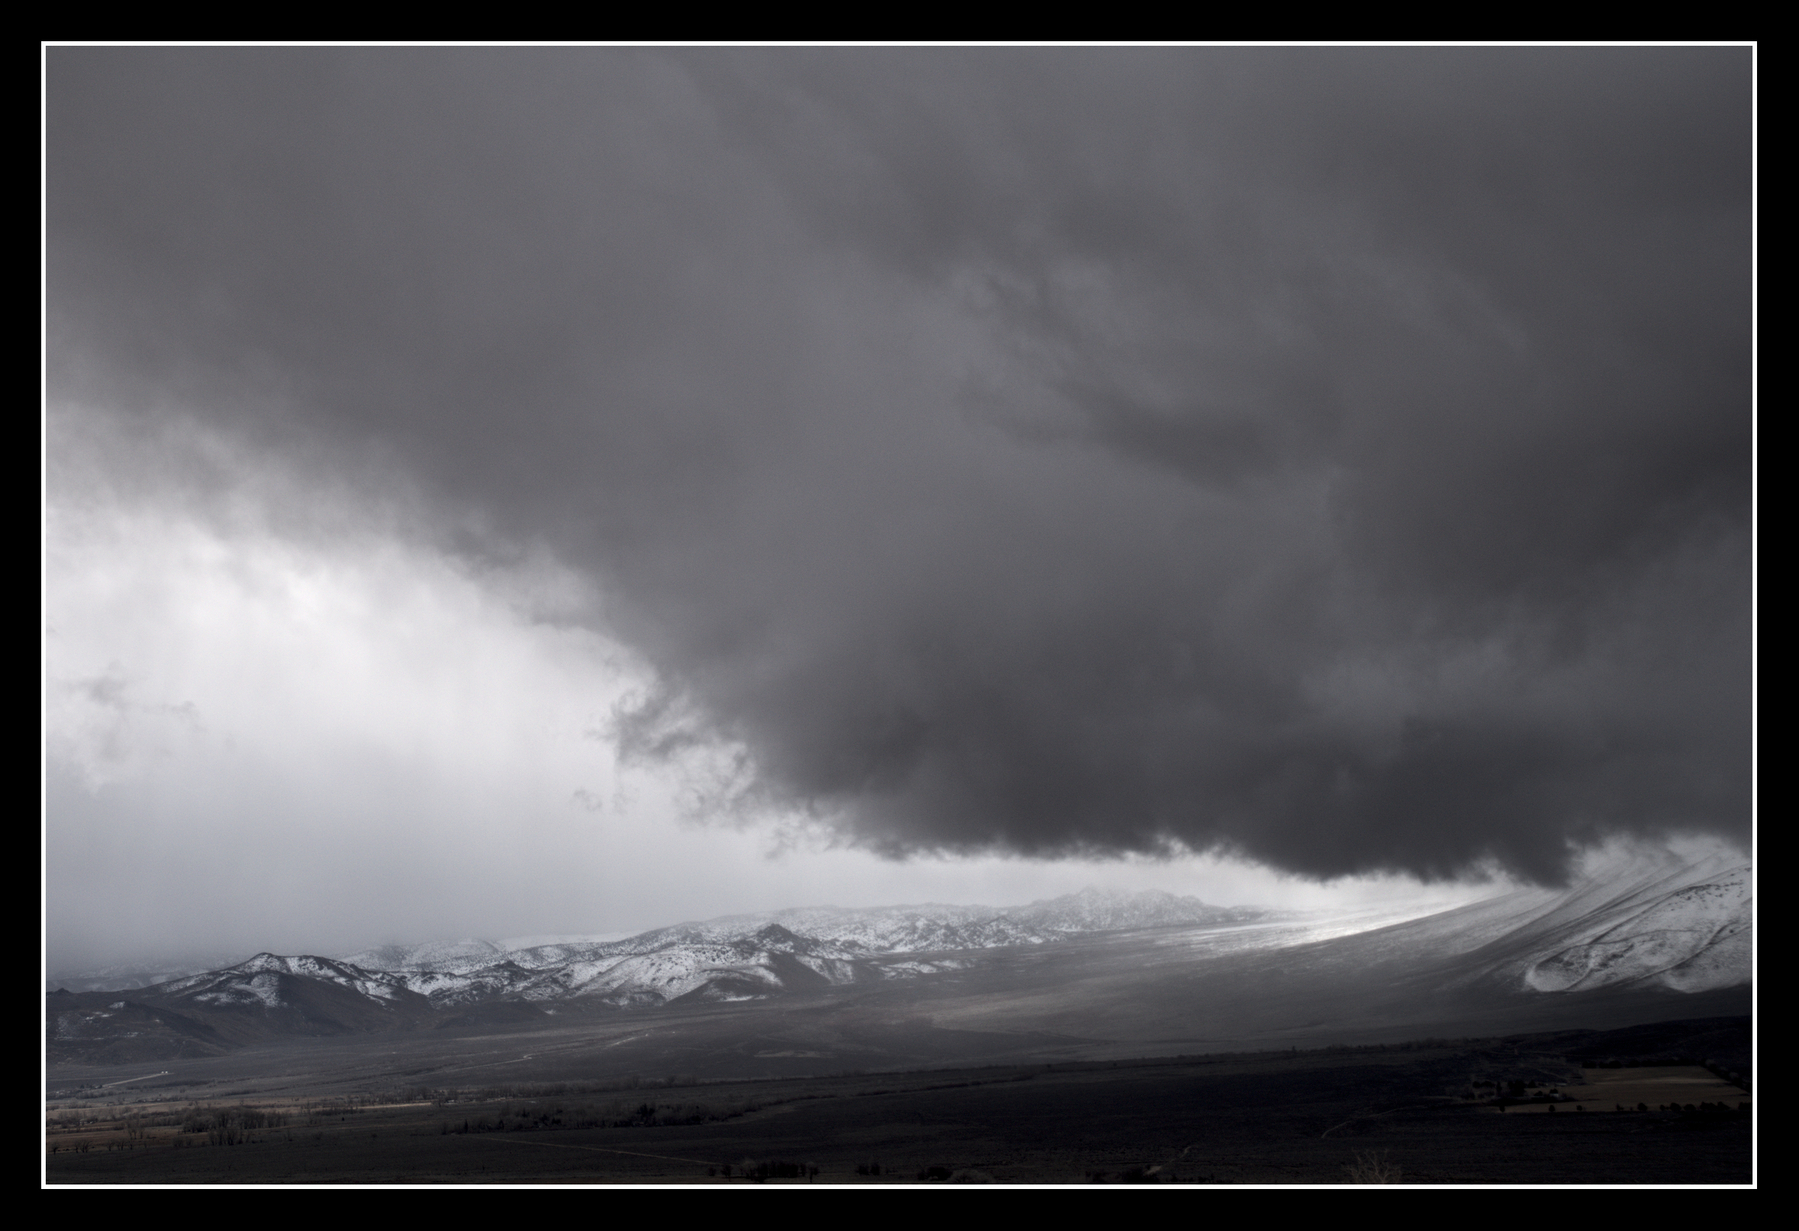 The tail of a mountain slopes from right to left, dwarfed by a large, dark cloud hovering over it.